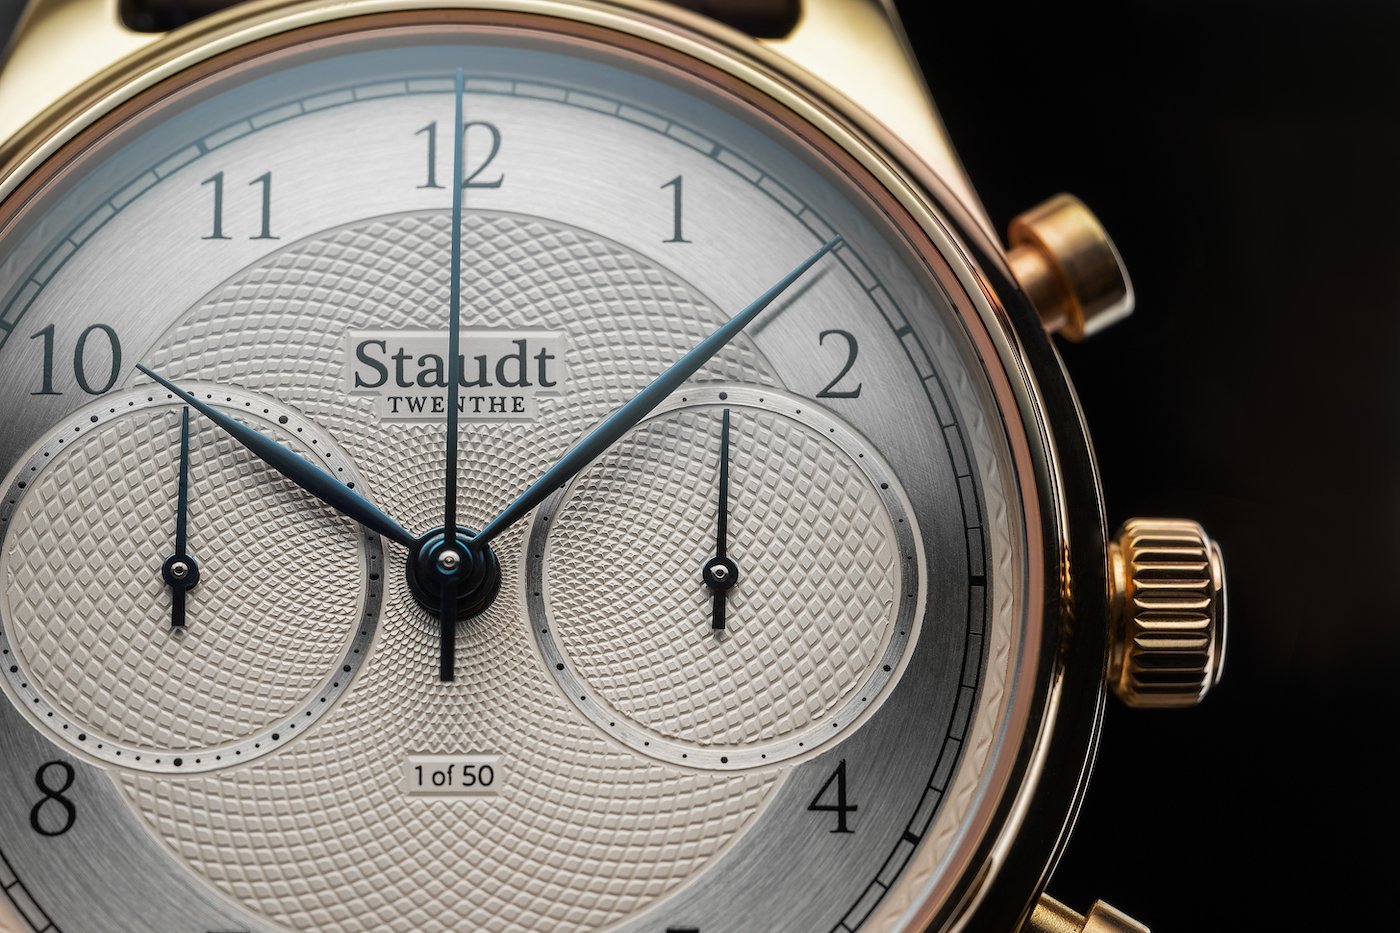 An introduction to Staudt's Guilloche Chronograph